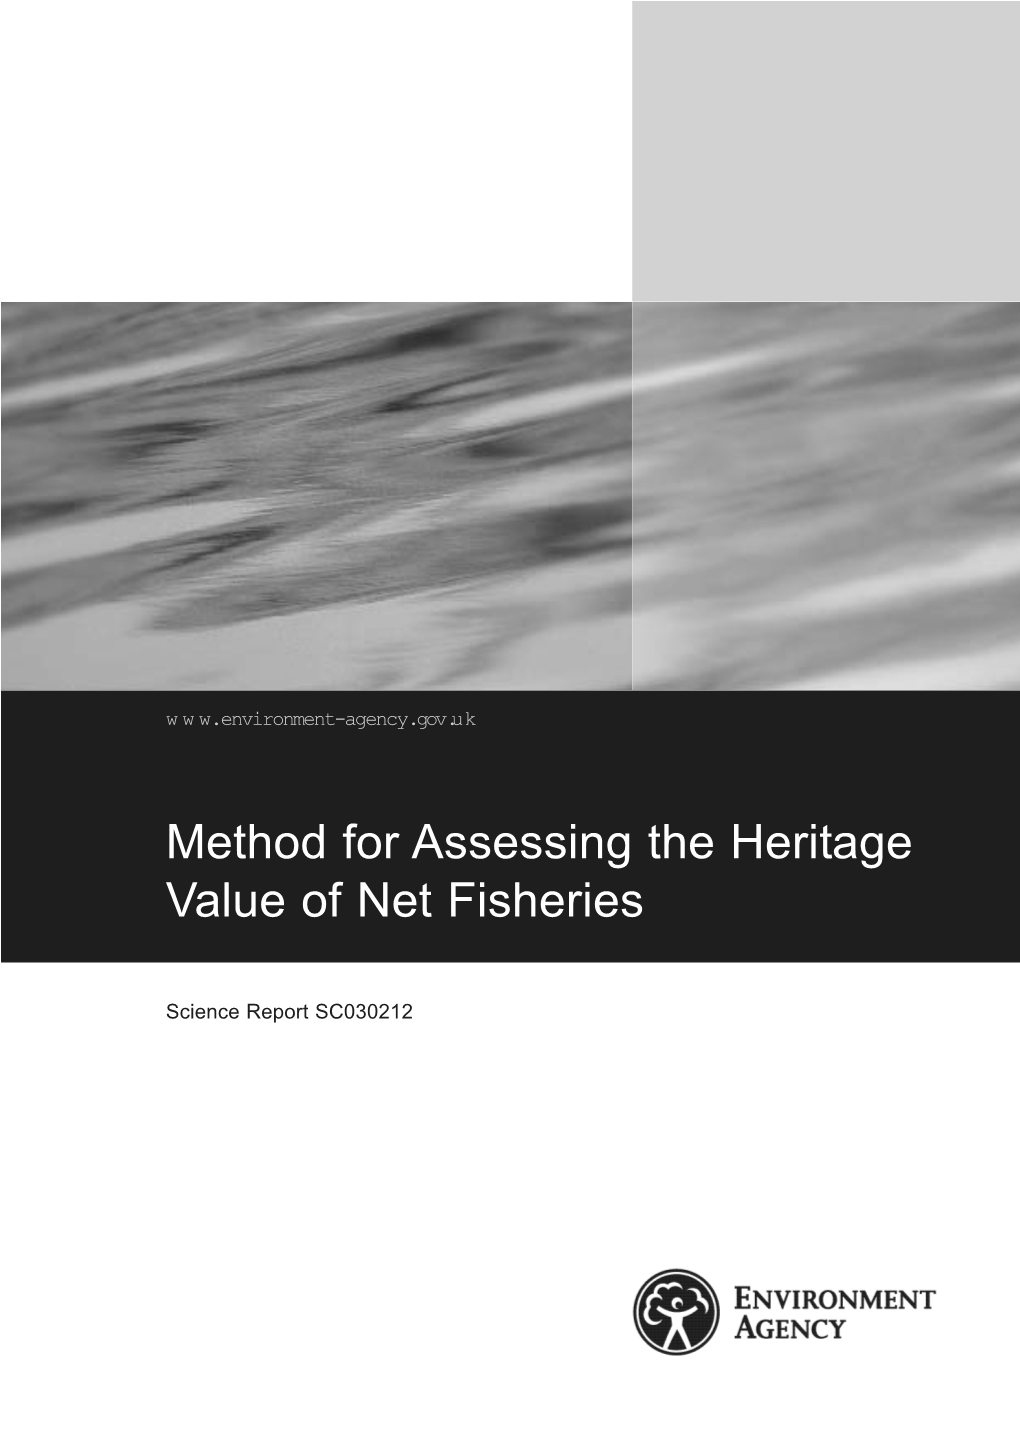 Method for Assessing the Heritage Value of Net Fisheries